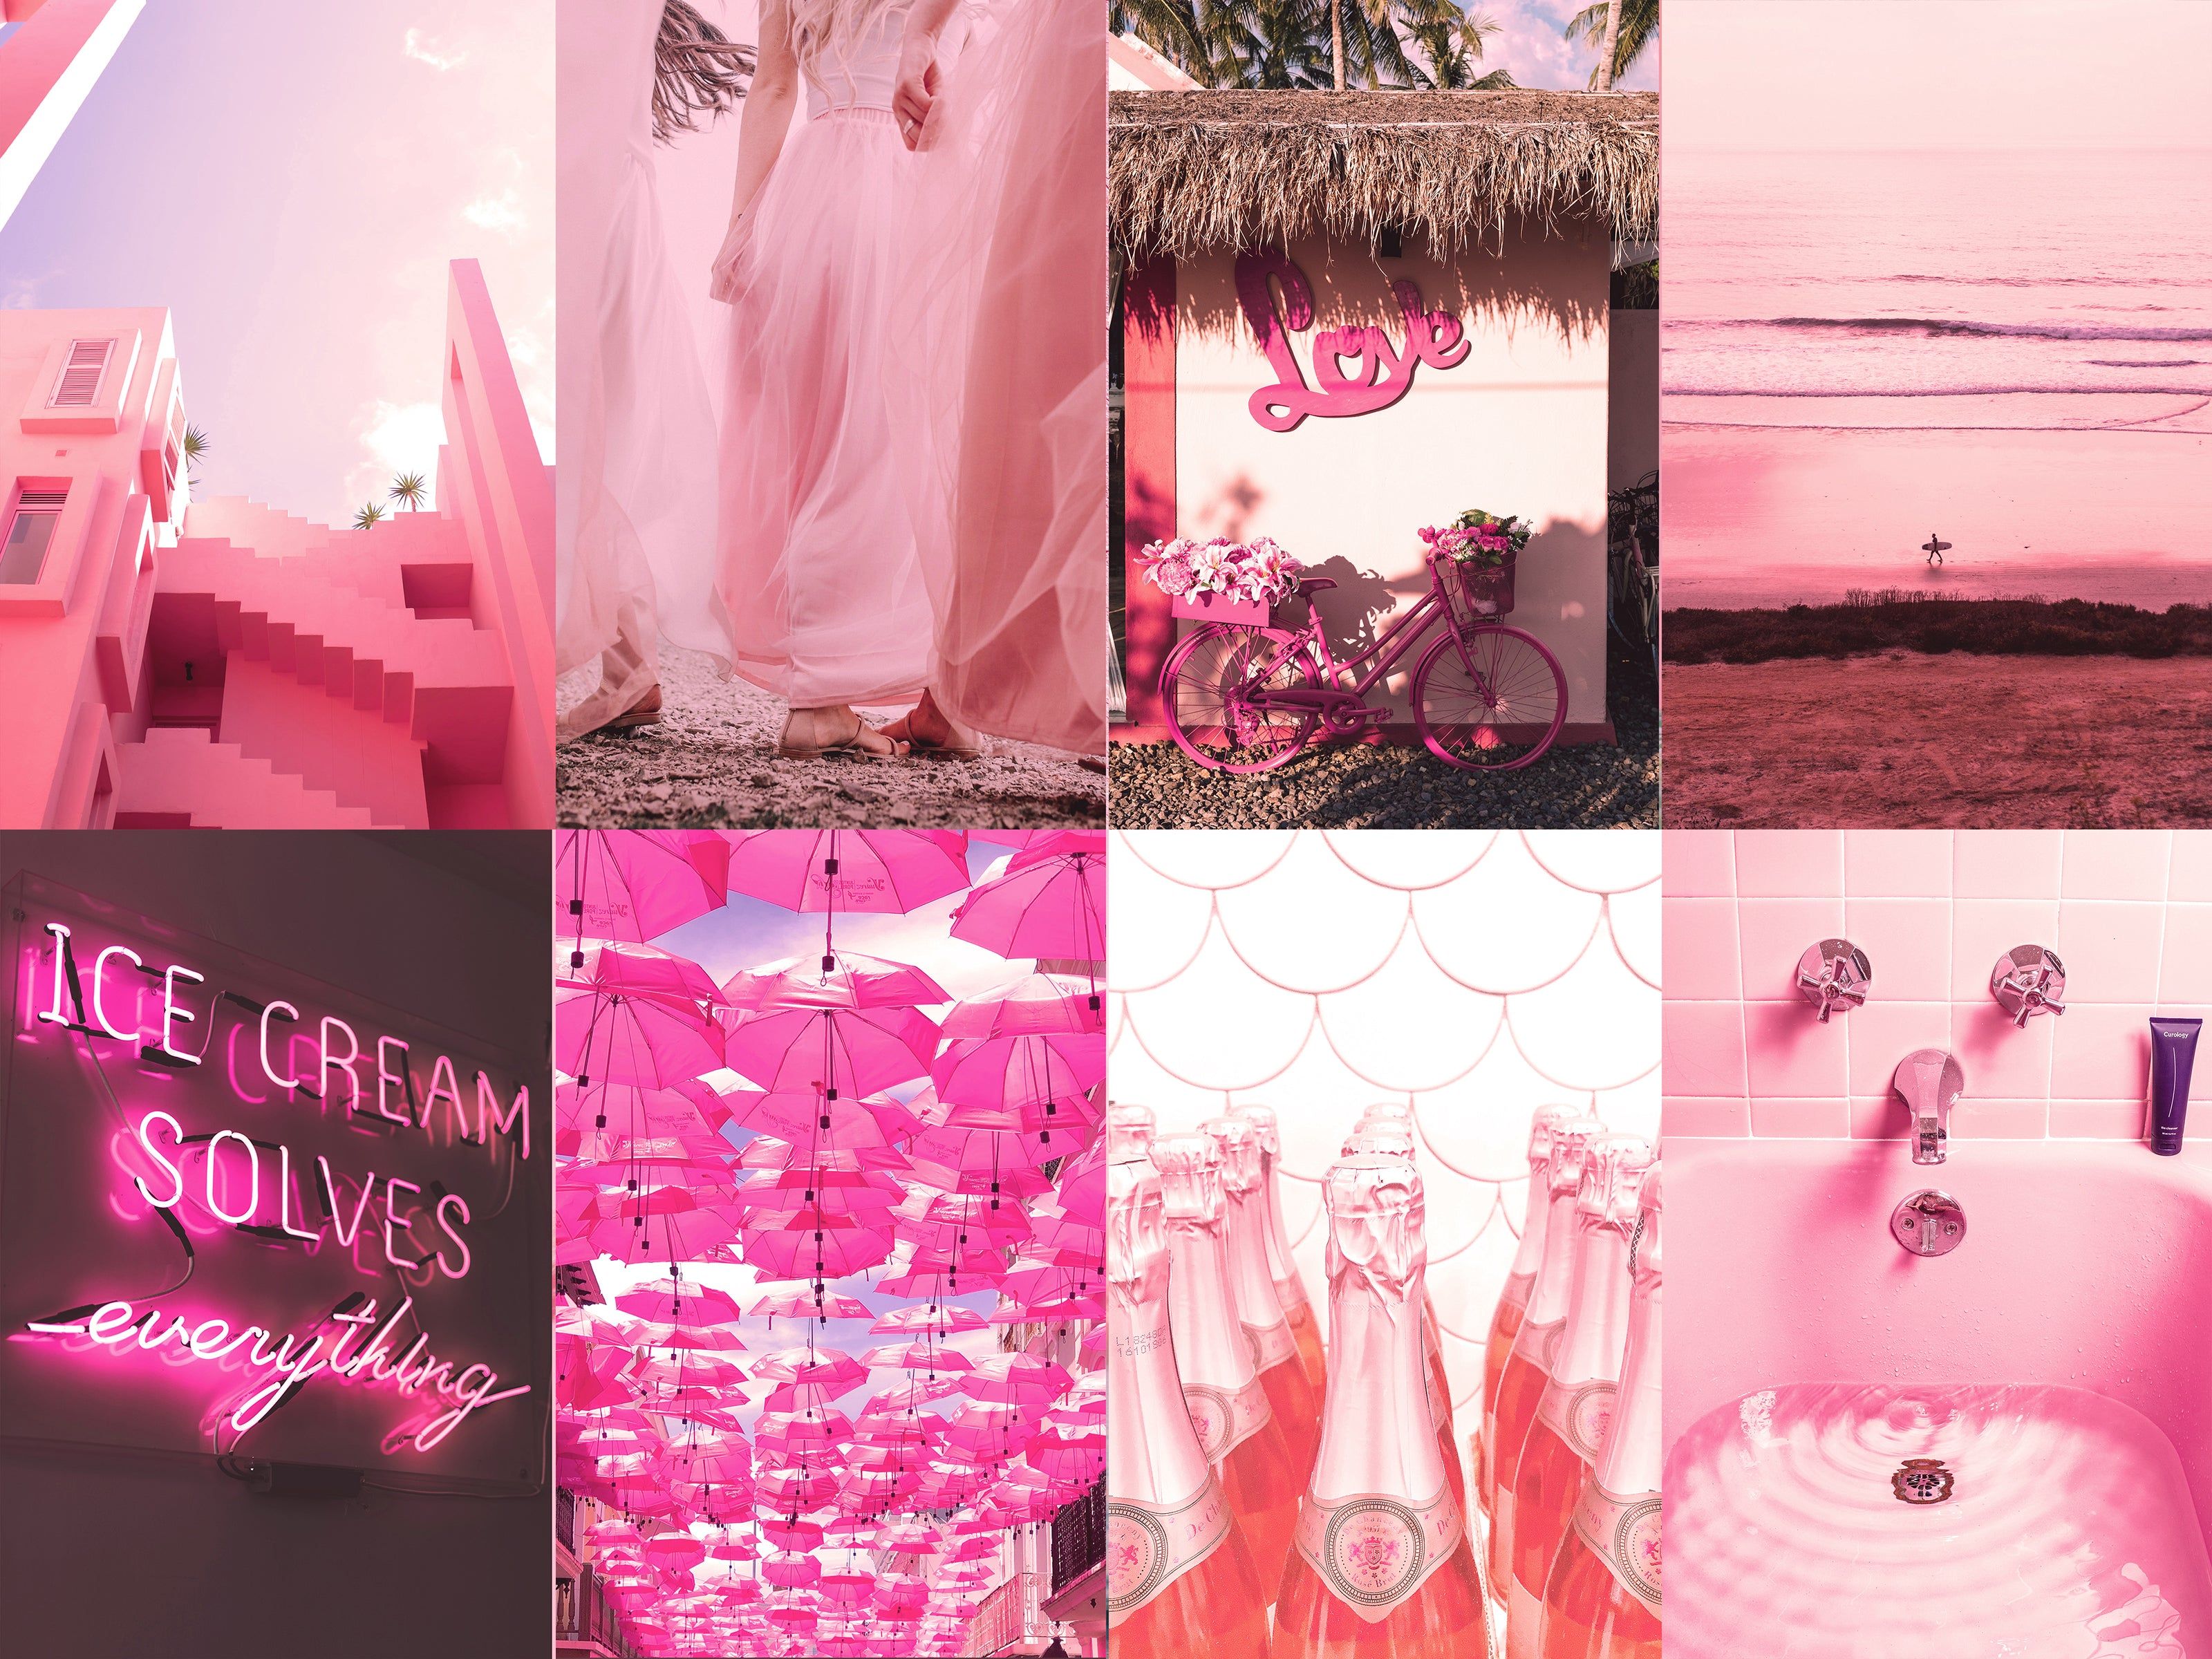 A collage of images in varying shades of pink. - Pink collage